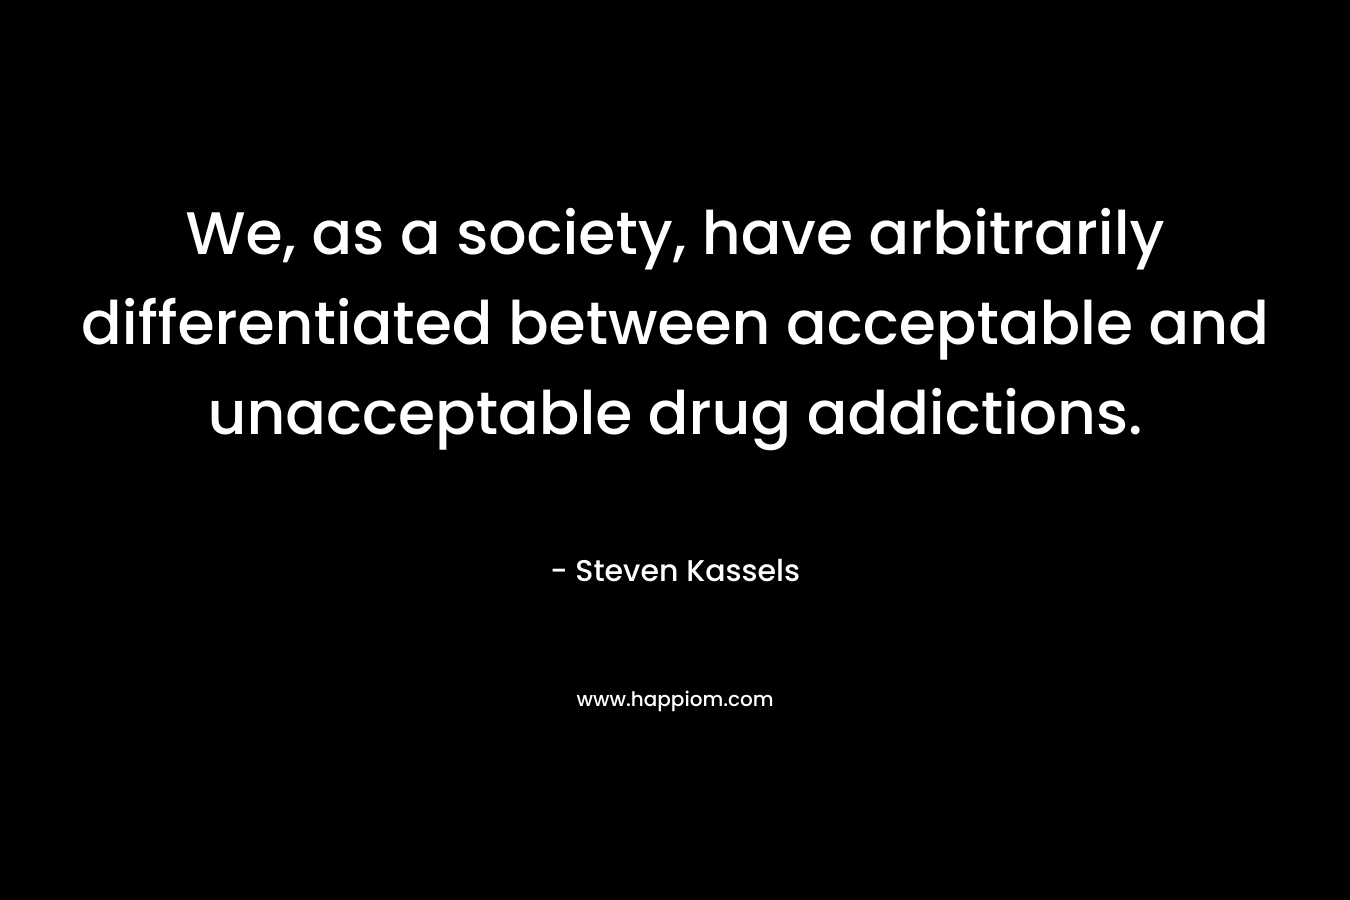 We, as a society, have arbitrarily differentiated between acceptable and unacceptable drug addictions. – Steven Kassels